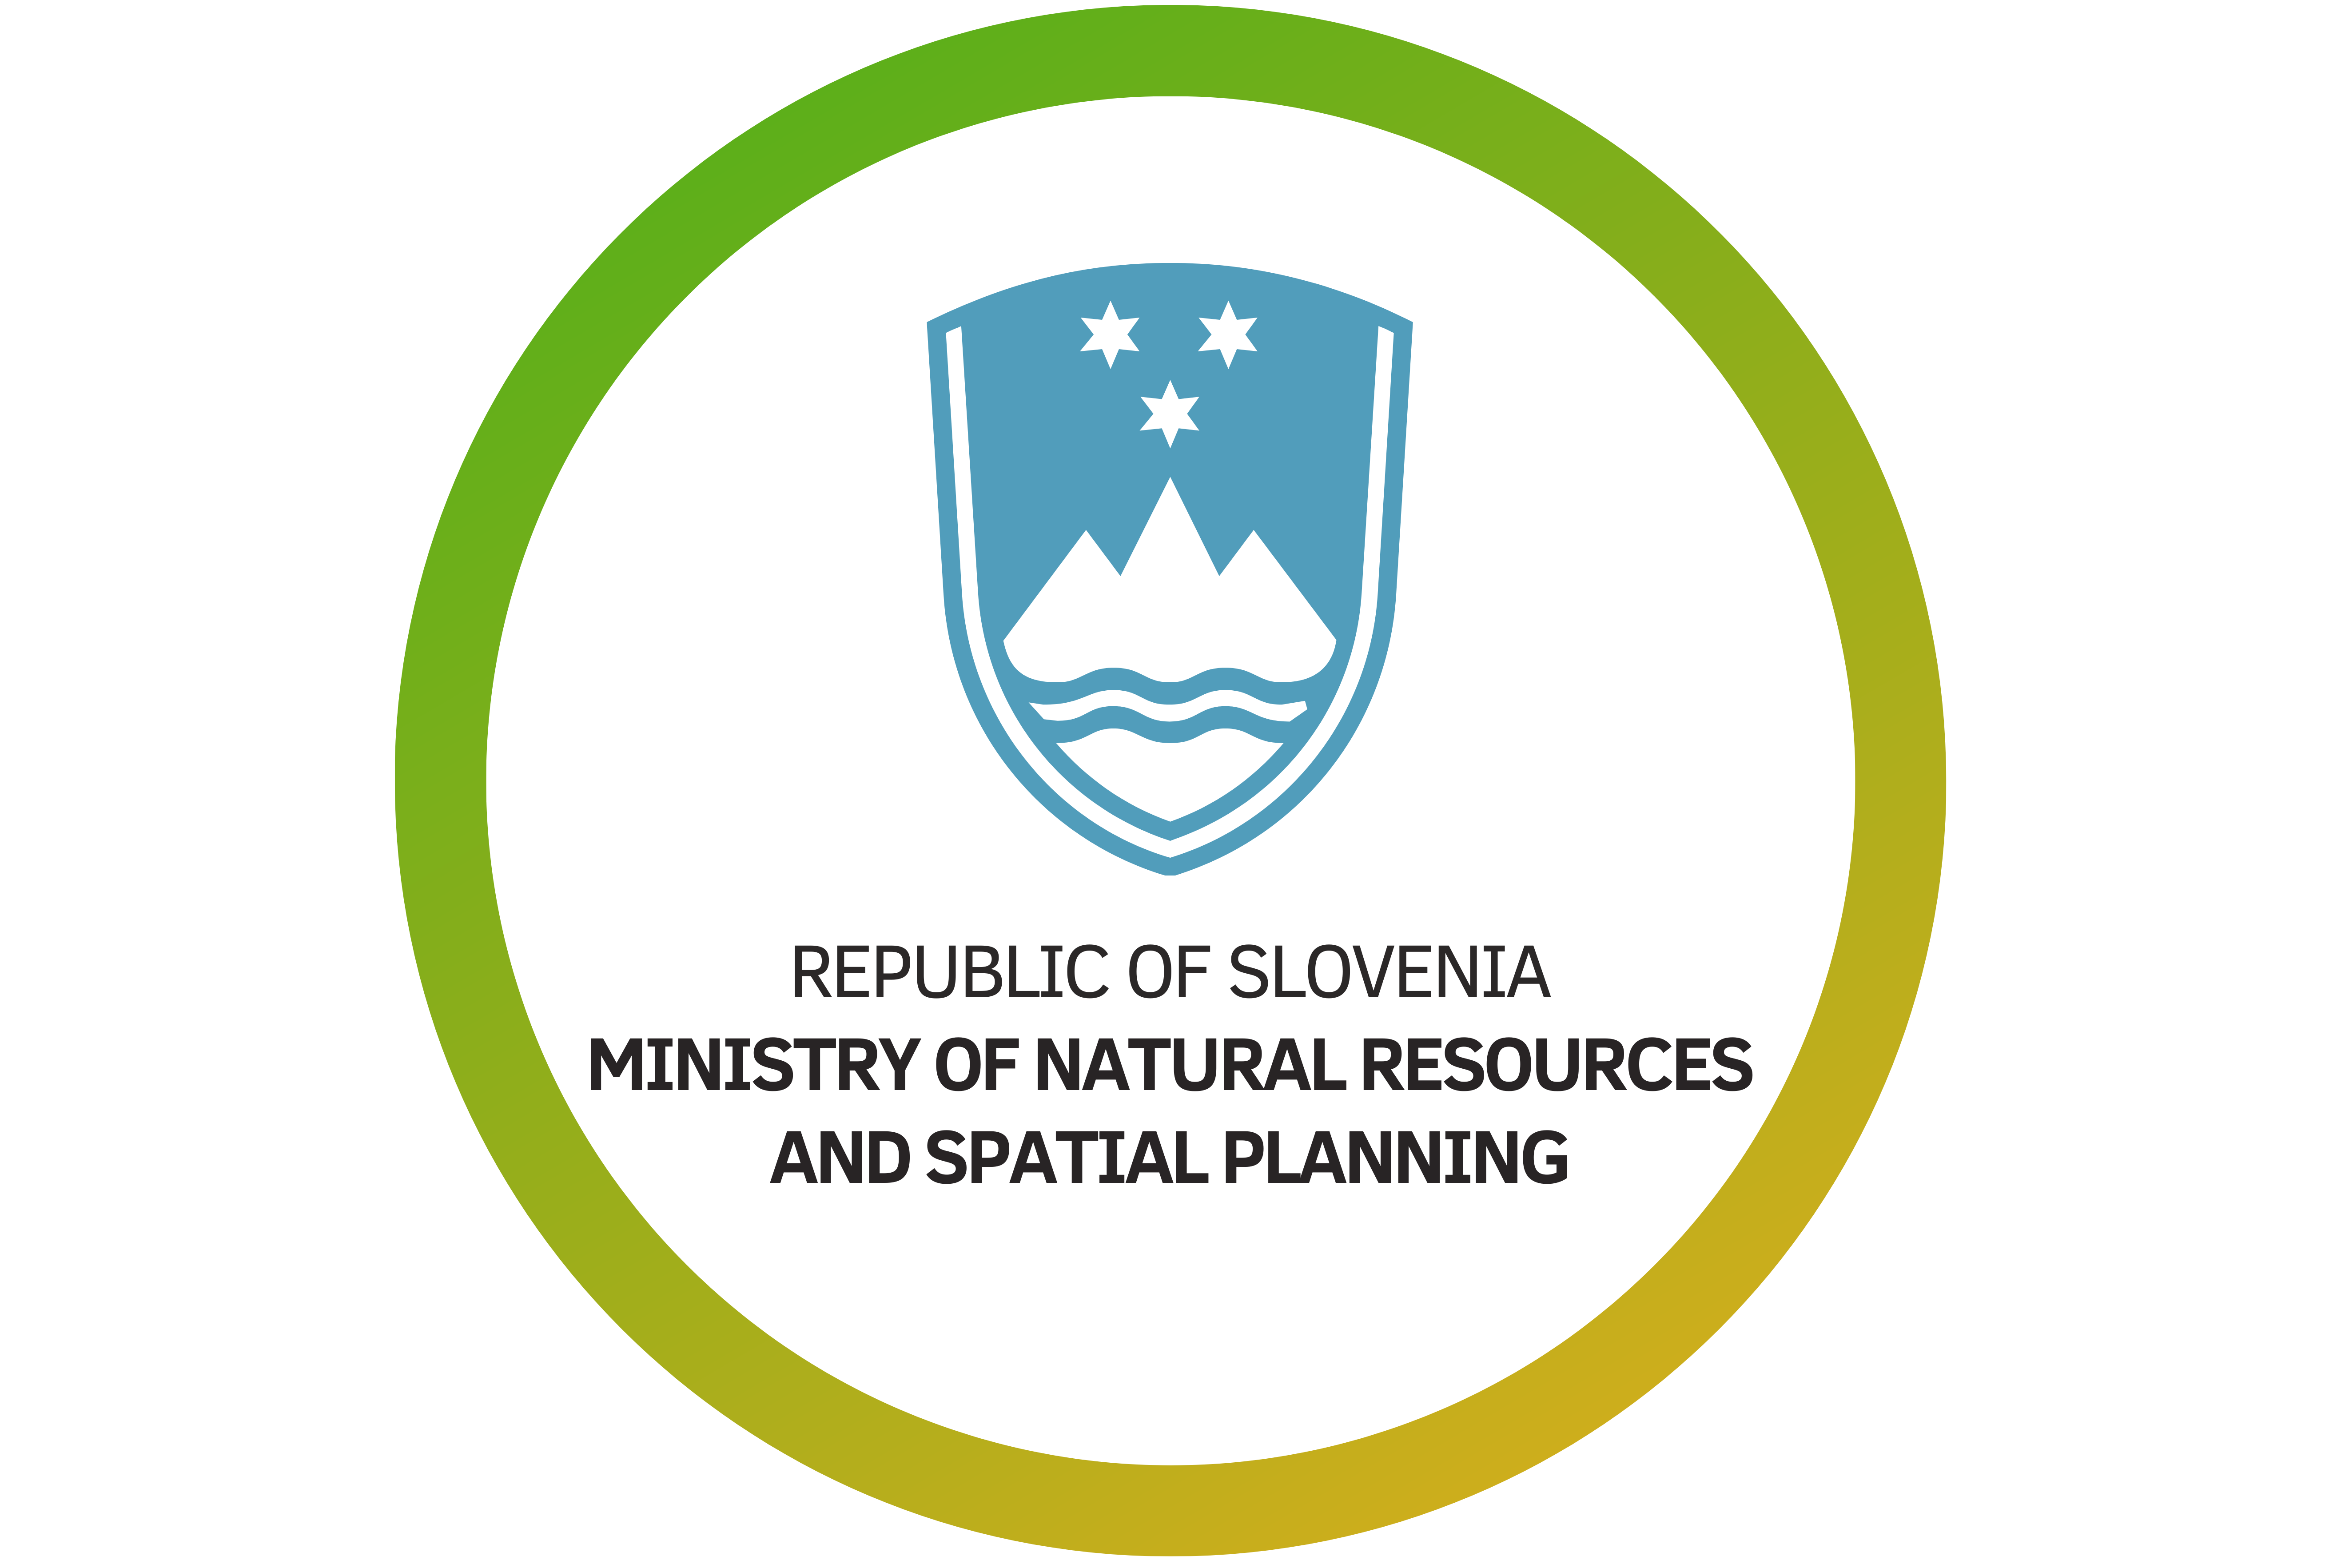 Ministry of Natural Resources and Spatial Planning of Slovenia2